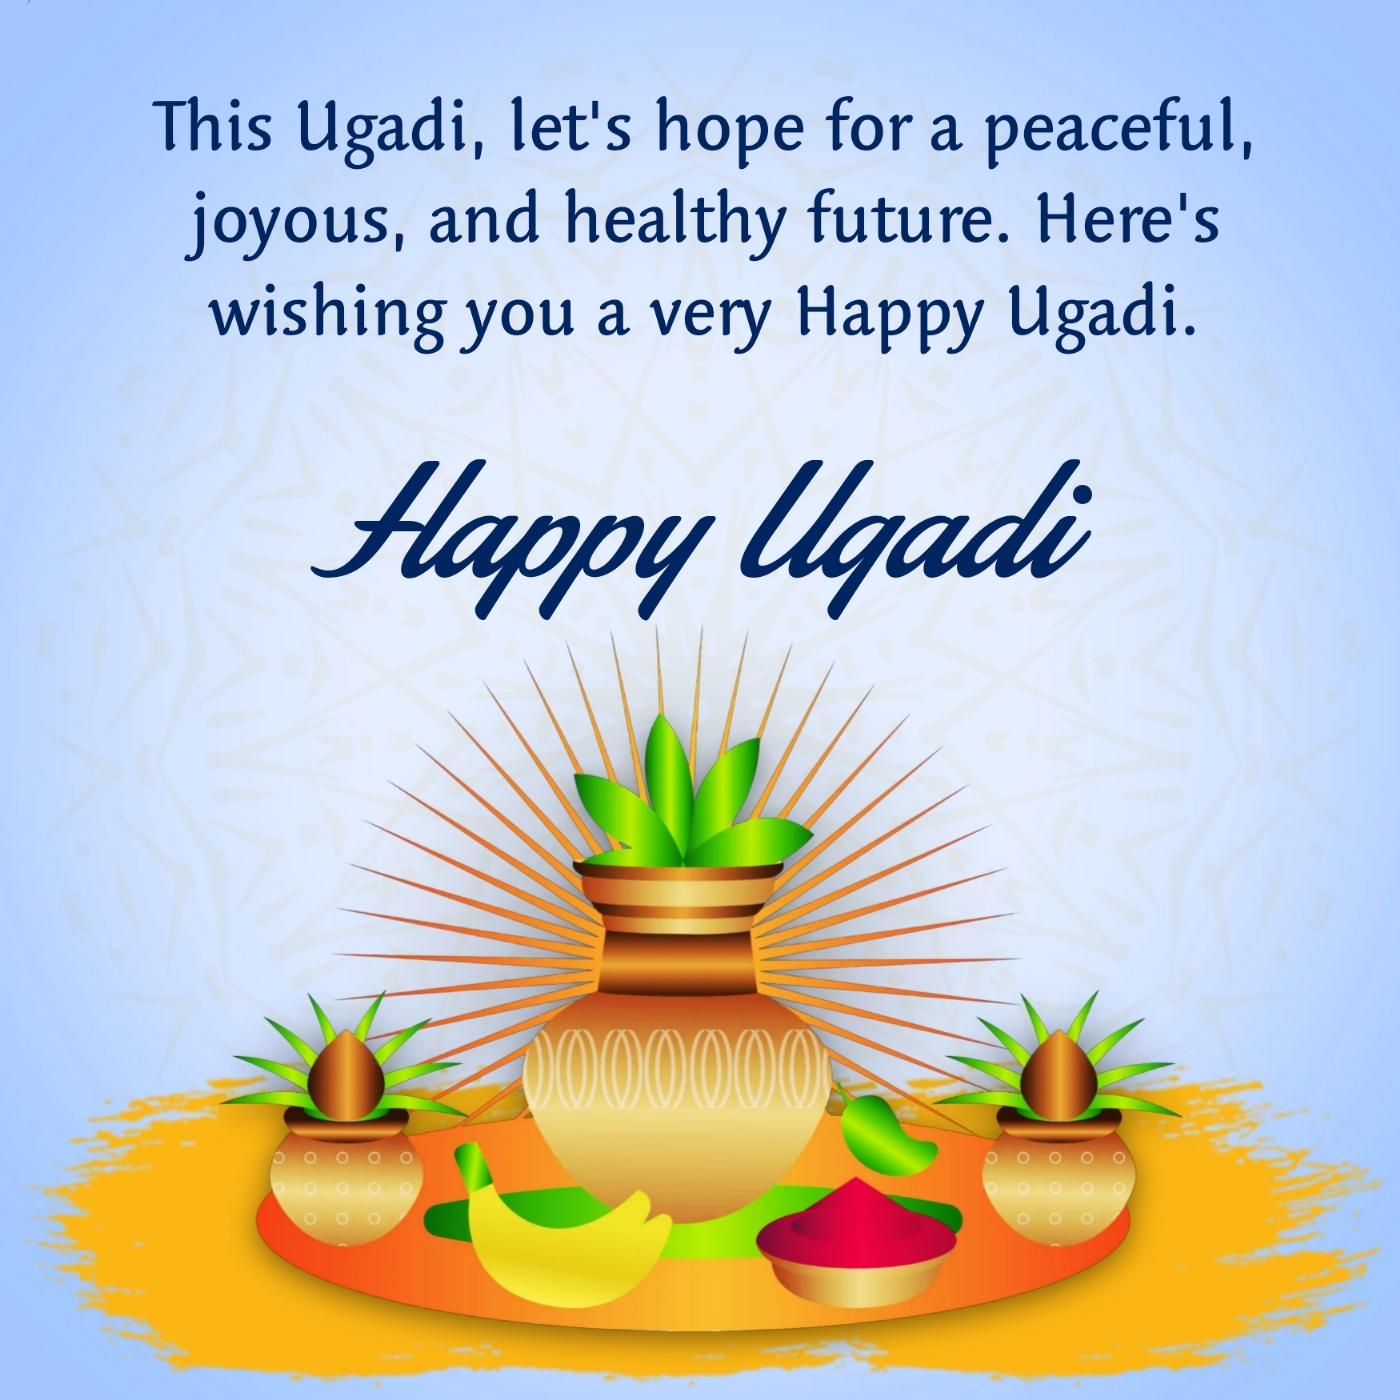 This Ugadi let's hope for a peaceful joyous and healthy